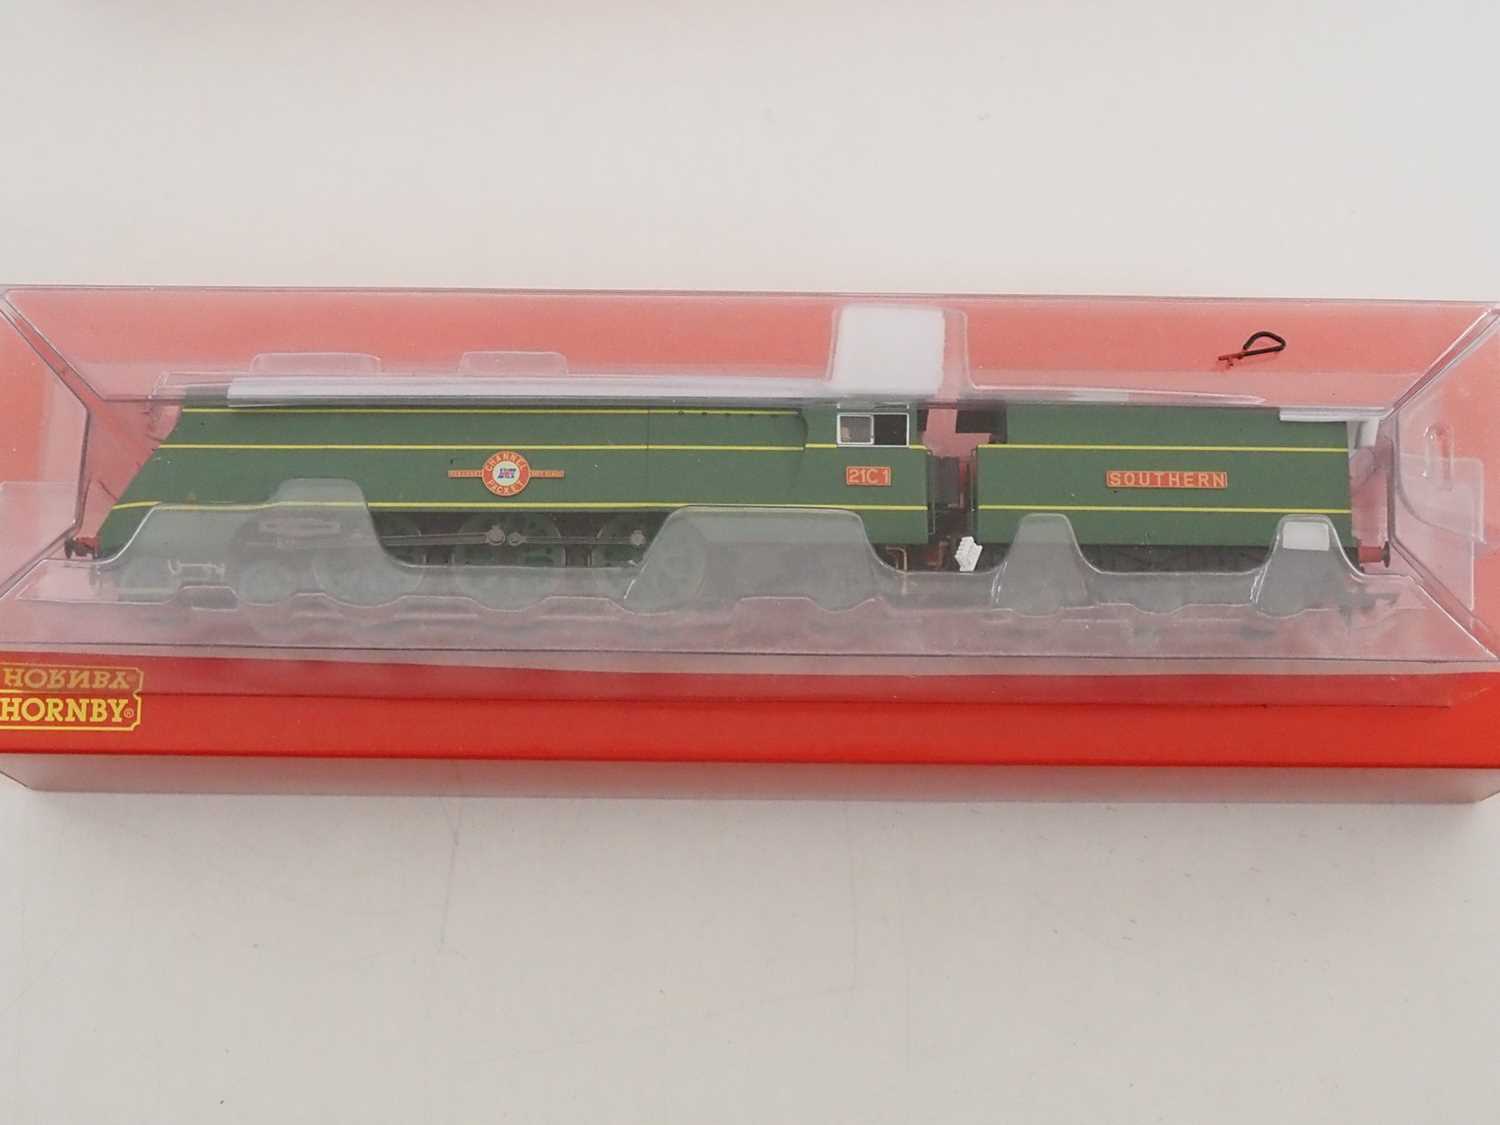 A HORNBY OO gauge R3434 Merchant Navy class steam locomotive in Southern green livery 'Channel - Image 2 of 5